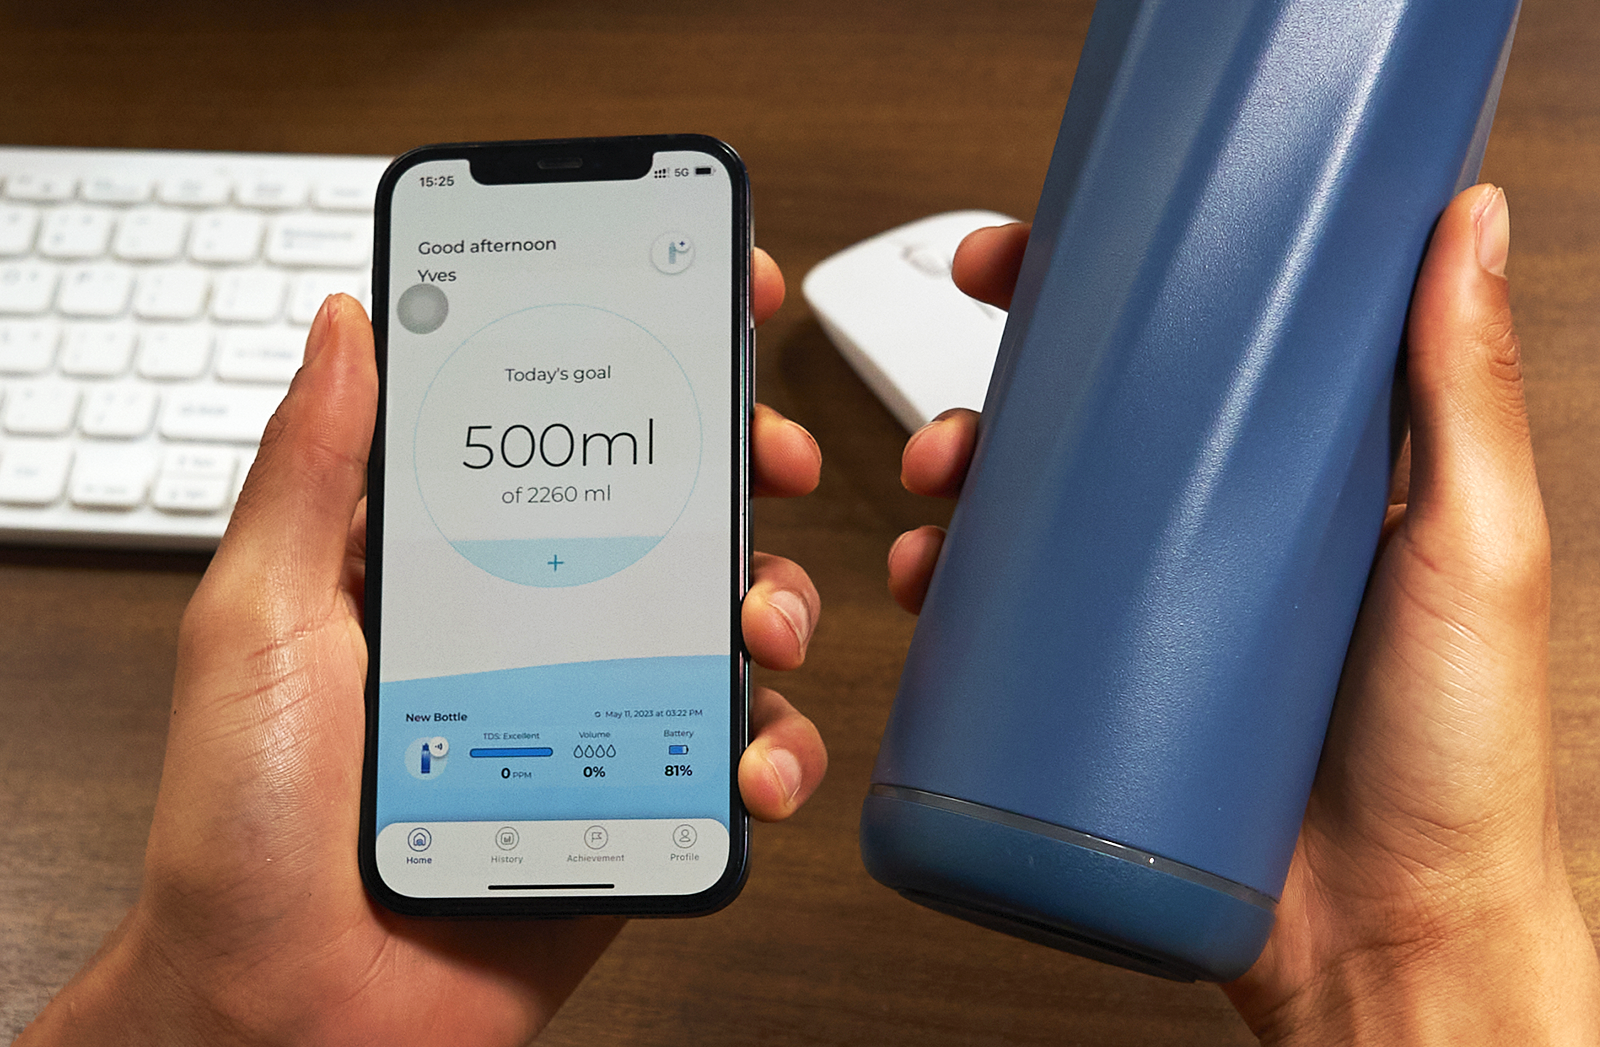 The Best Smart Water Bottles and High-Tech Products to Keep You Hydrated